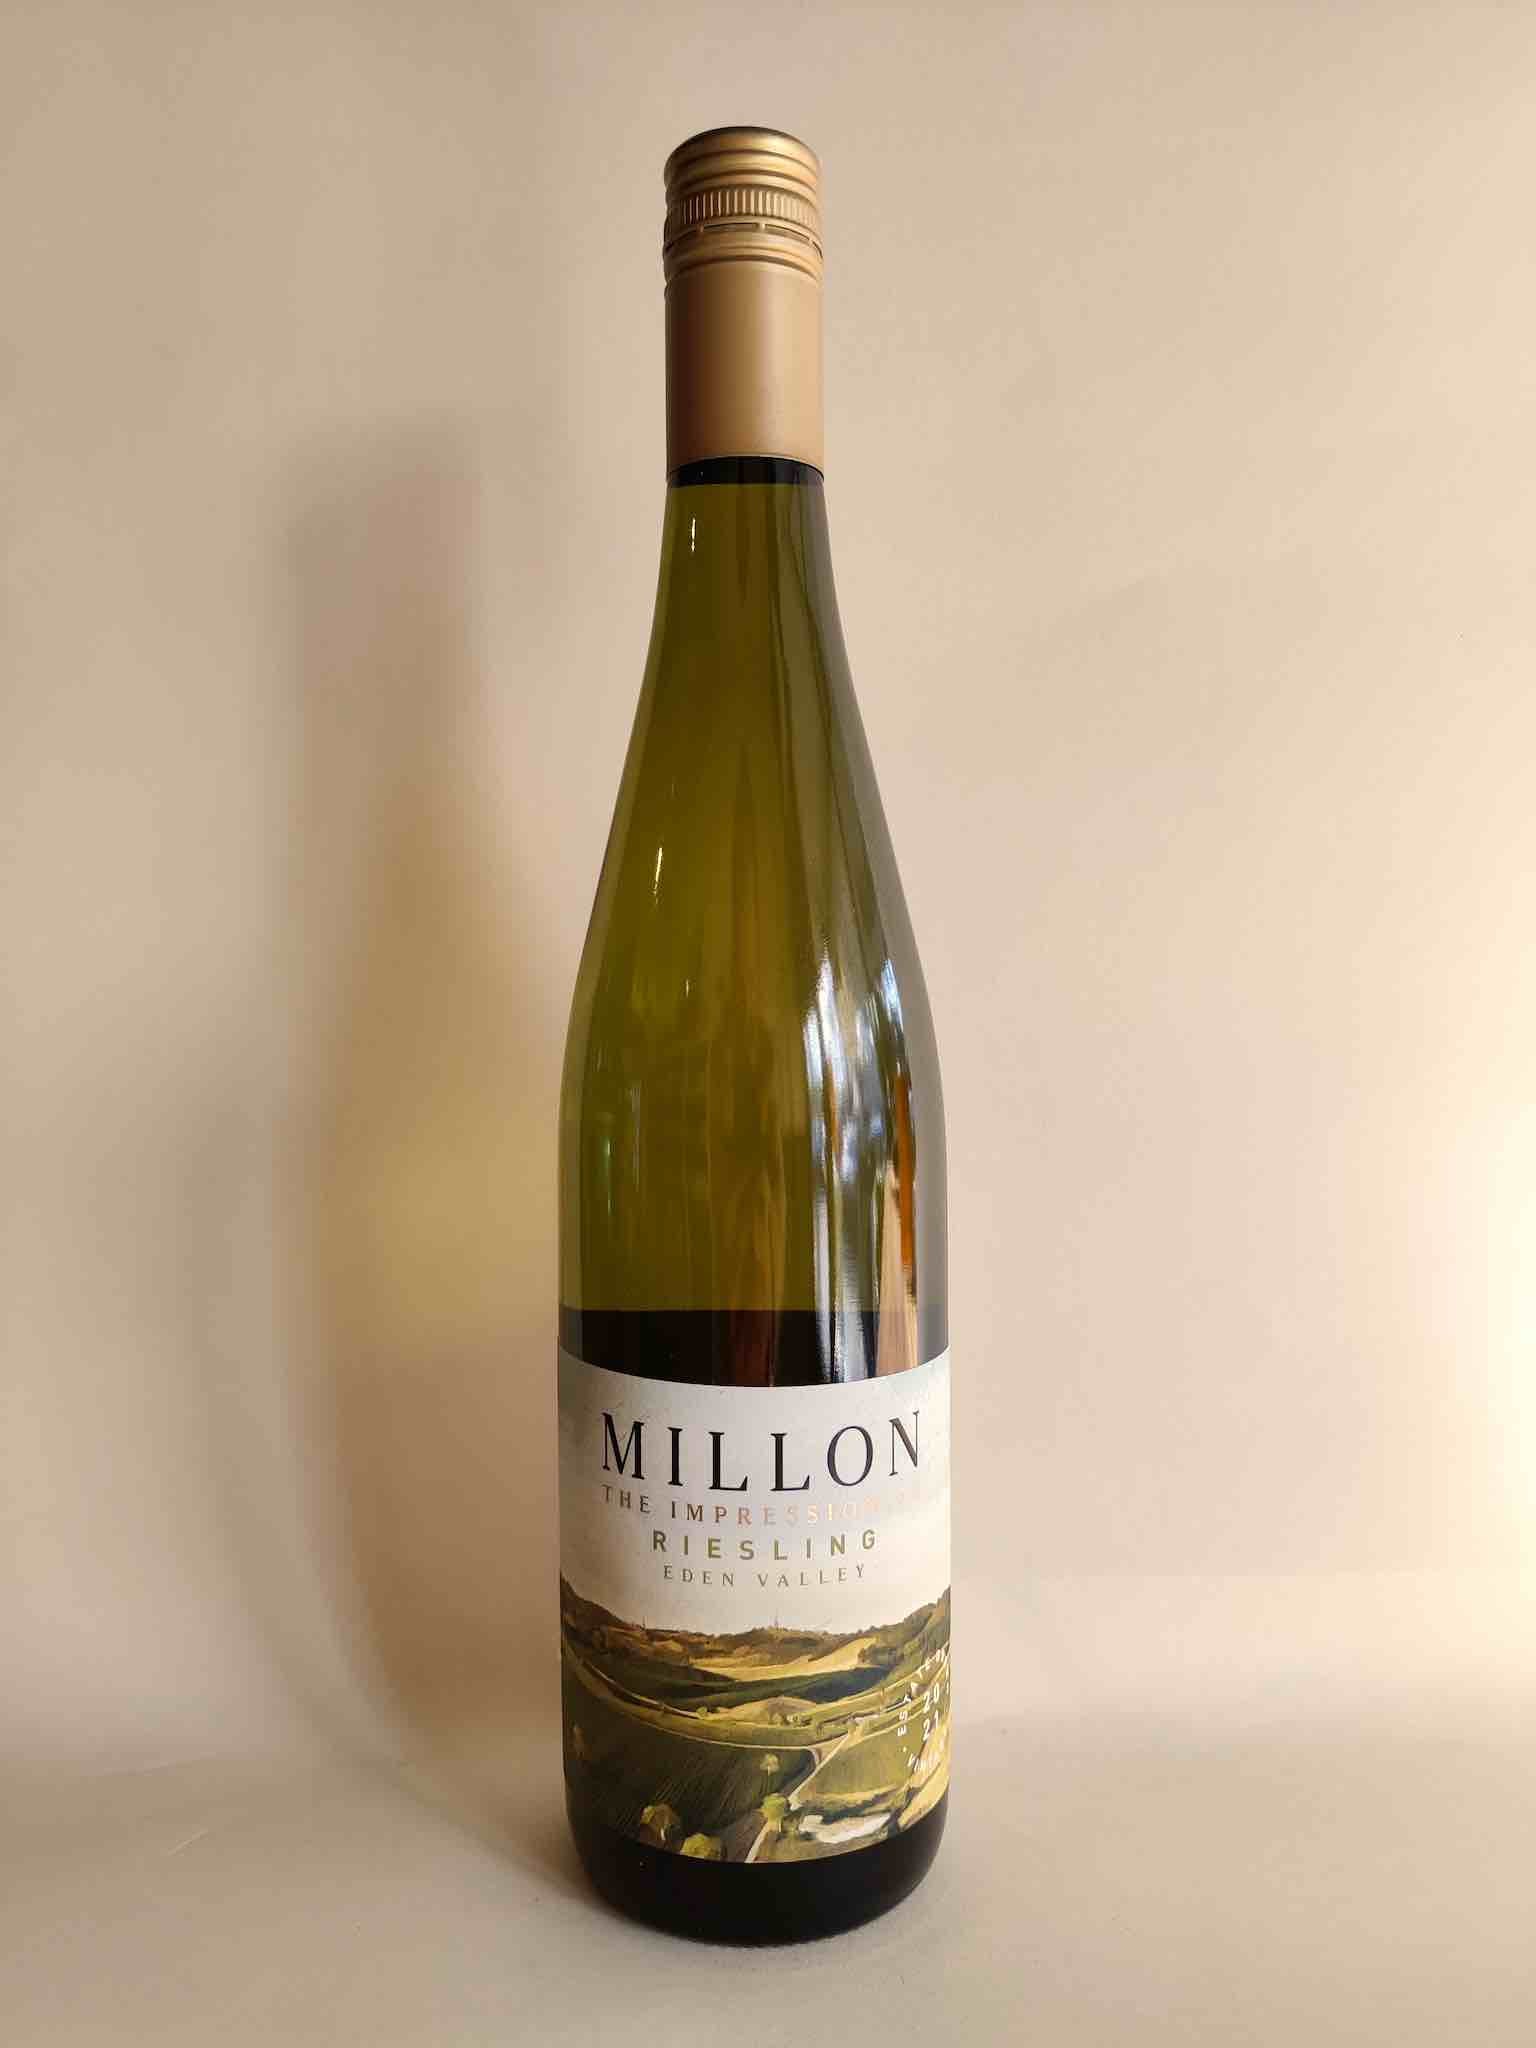 A 750ml bottle of Millon Wines "The Impressionist" Riesling from Eden Valley, South Australia. 